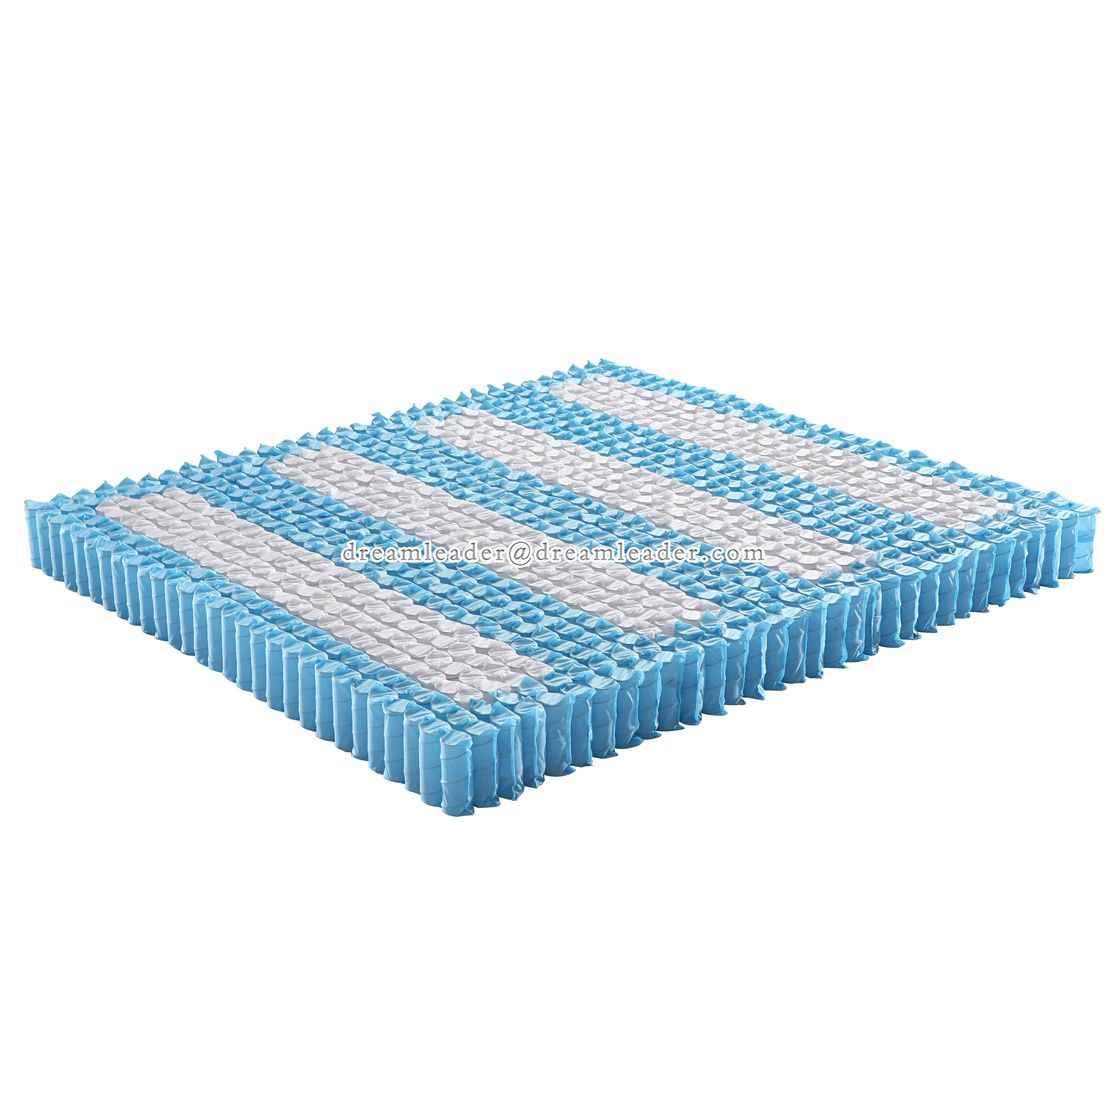 10 Things To Consider When Choosing Springs For Mattresses